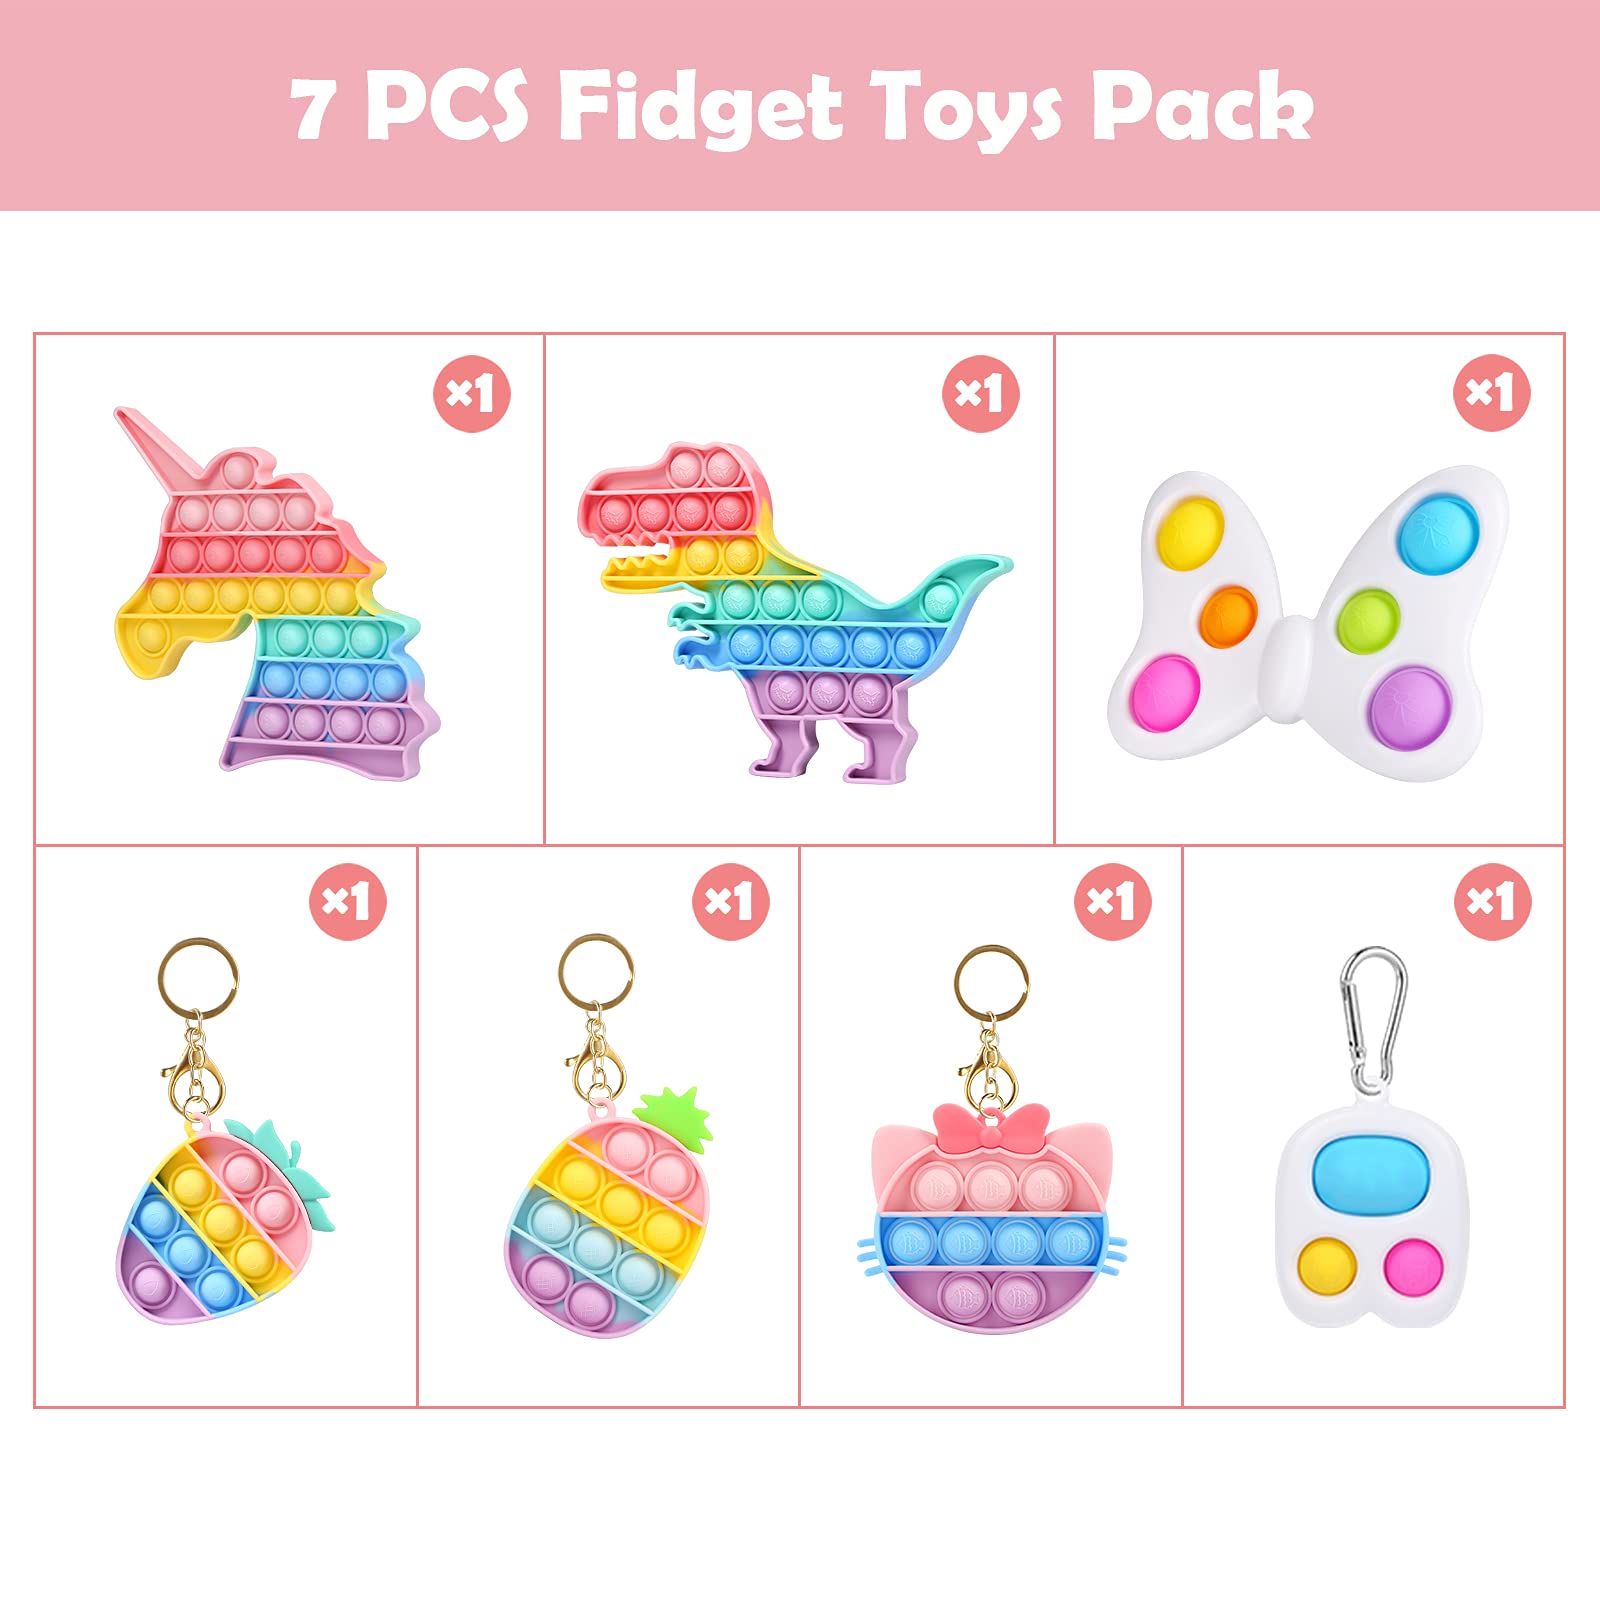 20 PCS Fidget Toys Pack Set Fidgets Toy Sets Packs 20 Packs Fidget Toys Pack Stress Relief and Anti-Anxiety Tools